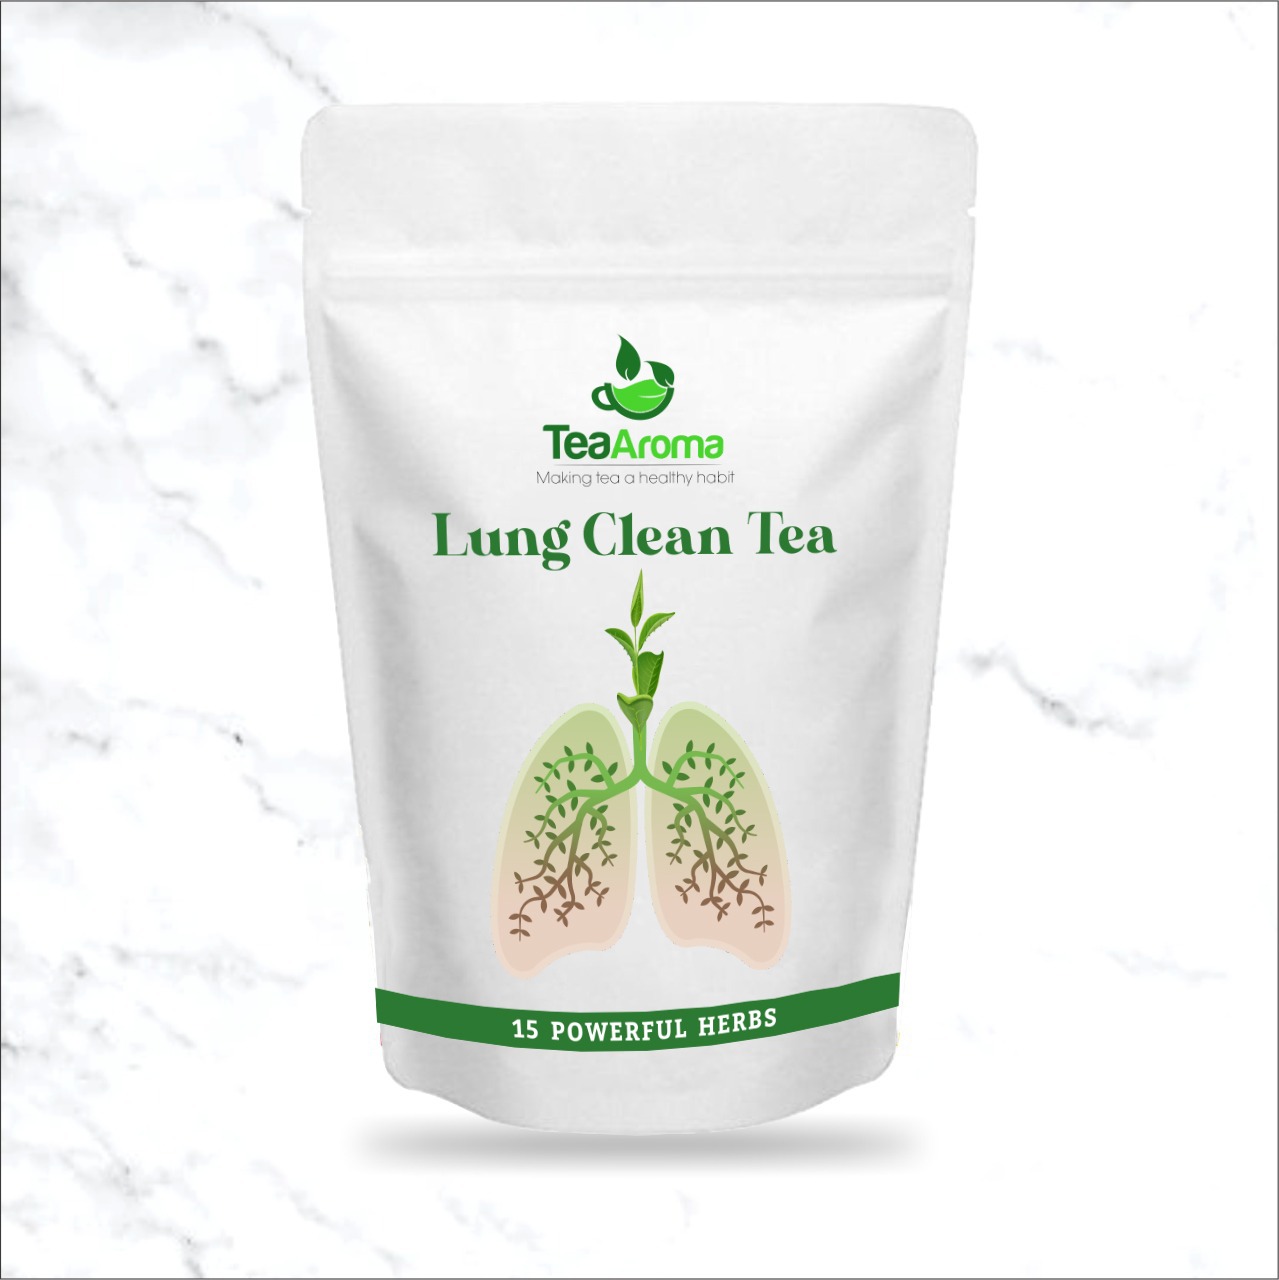 Tea  Lung Cleanse – Root (With The Goodness Of Tulsi, Eucalyptus